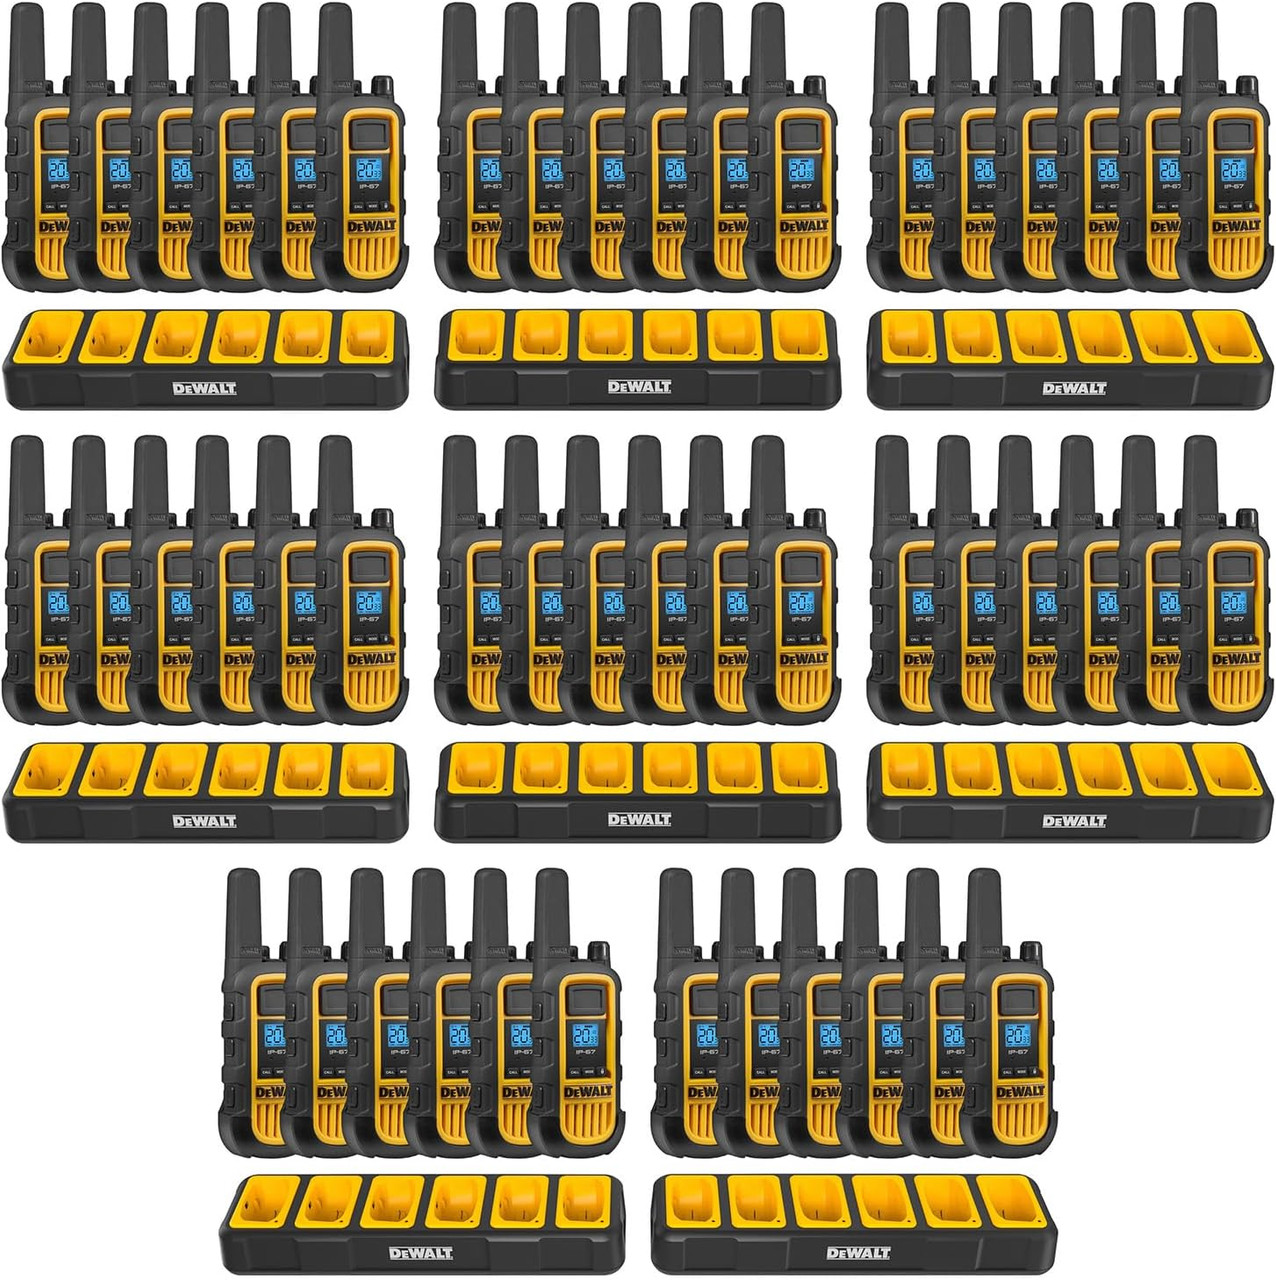 DeWALT DXFRS800 Heavy Duty Walkie Talkies - Pack of 48 with Six Port Charging Stations